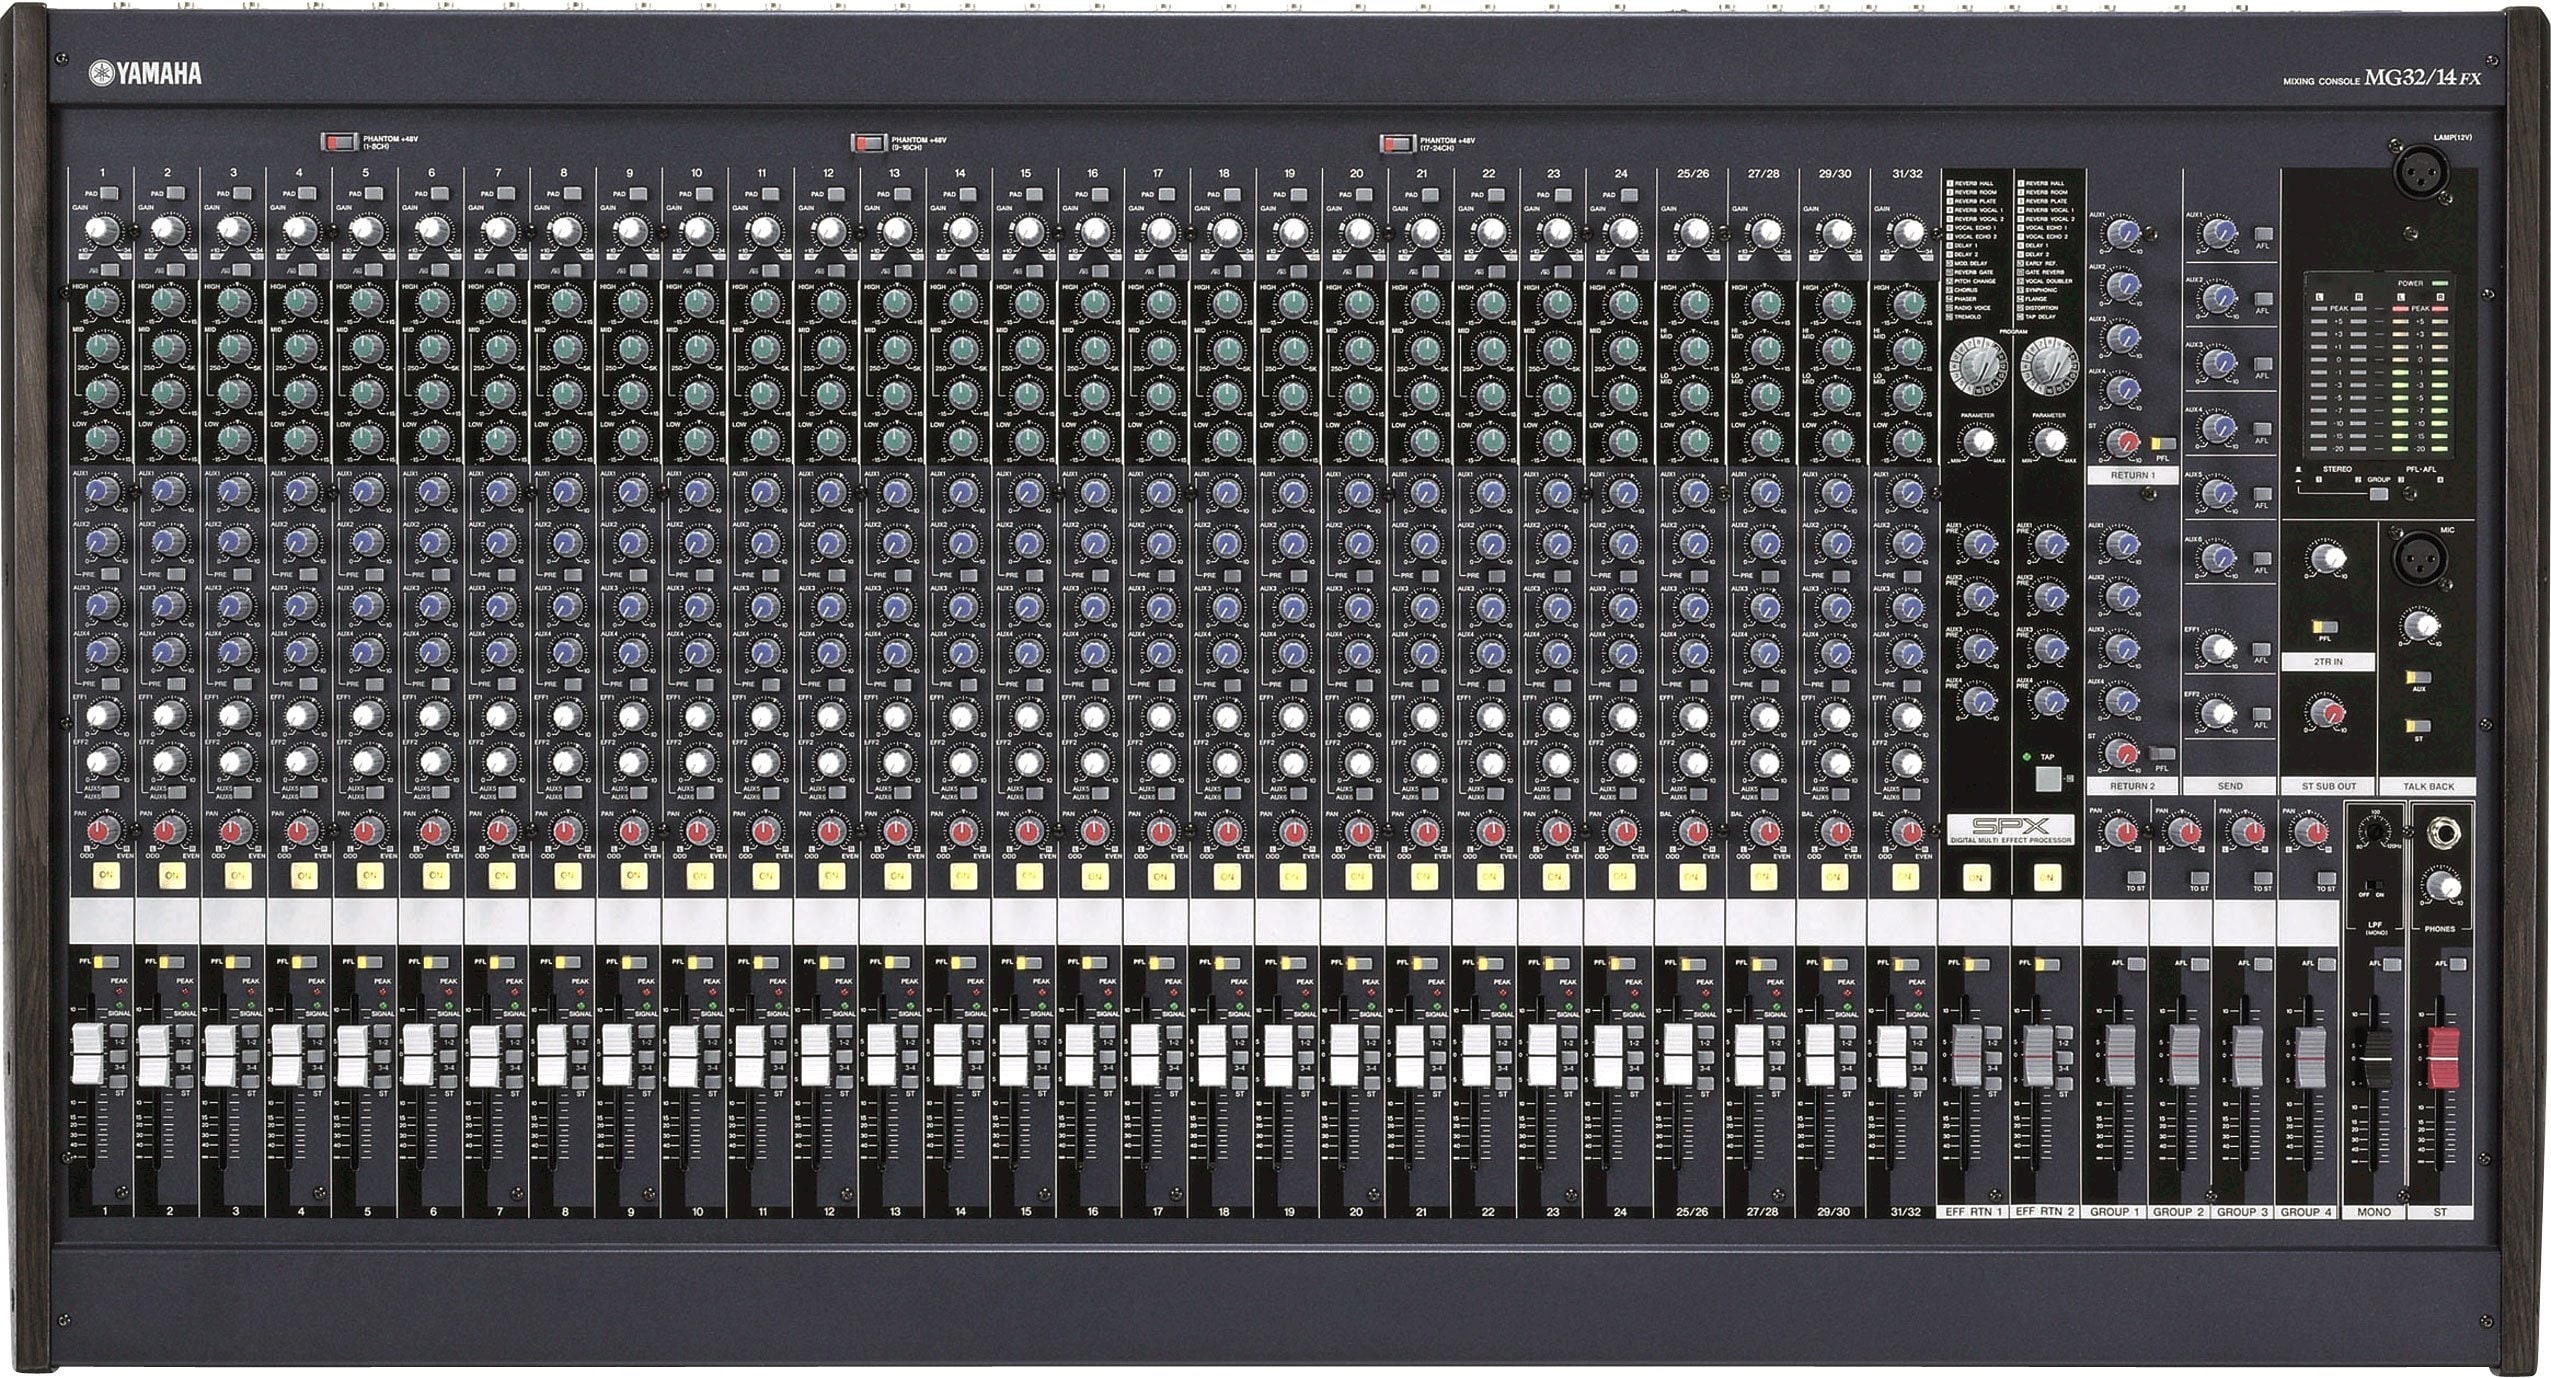 MG32/14FX, MG24/14FX - Overview - Mixers - Professional Audio 